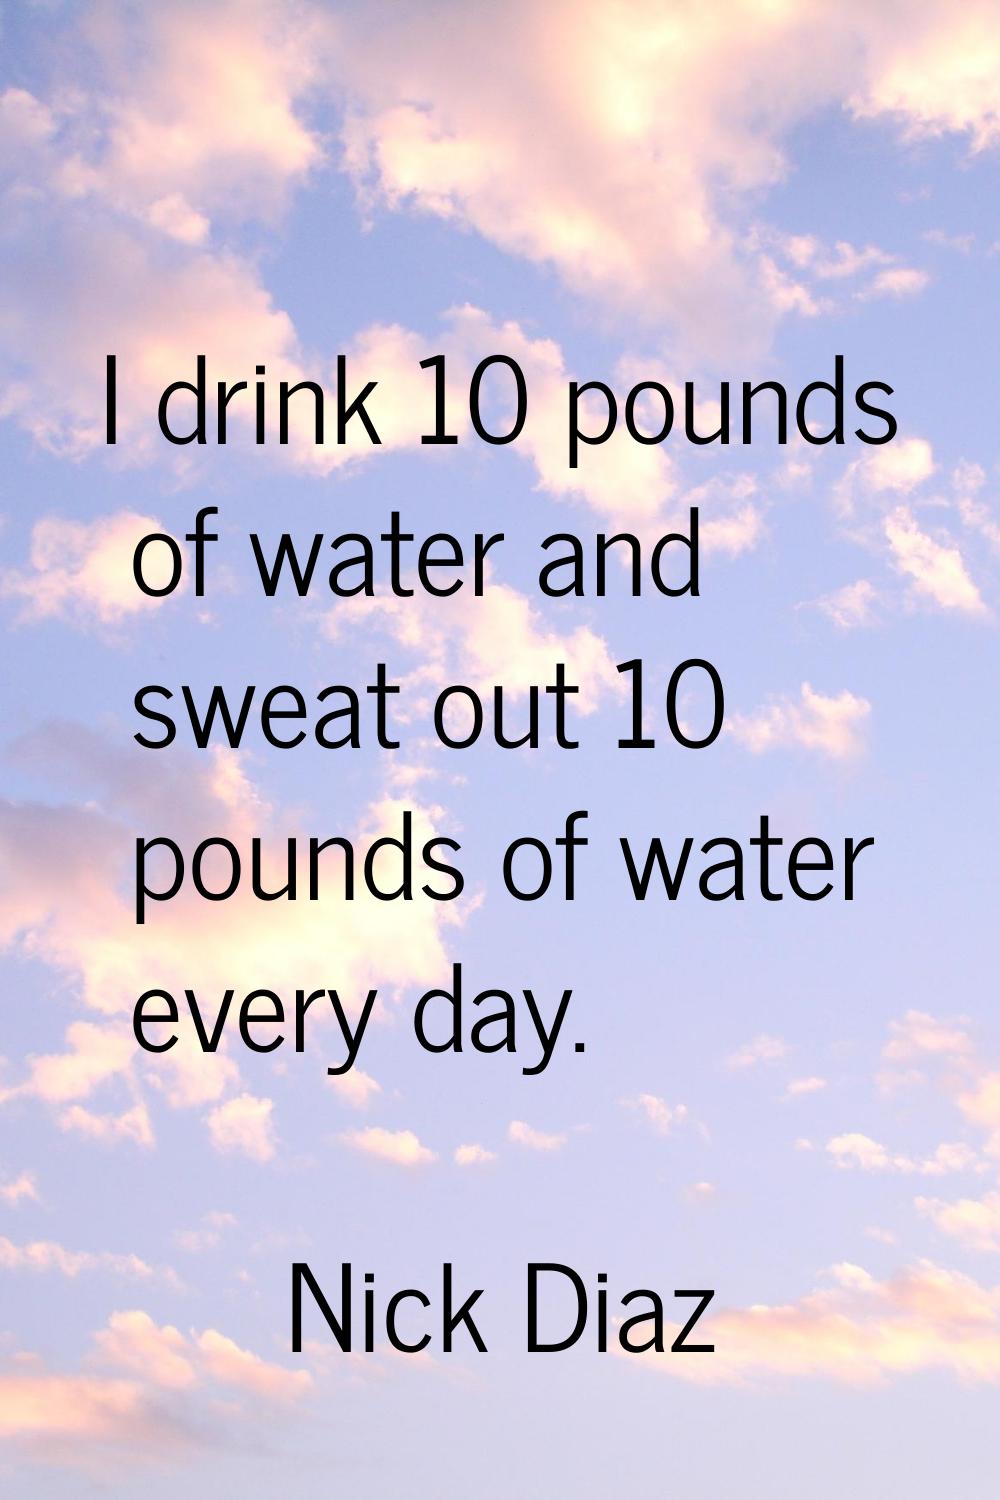 I drink 10 pounds of water and sweat out 10 pounds of water every day.